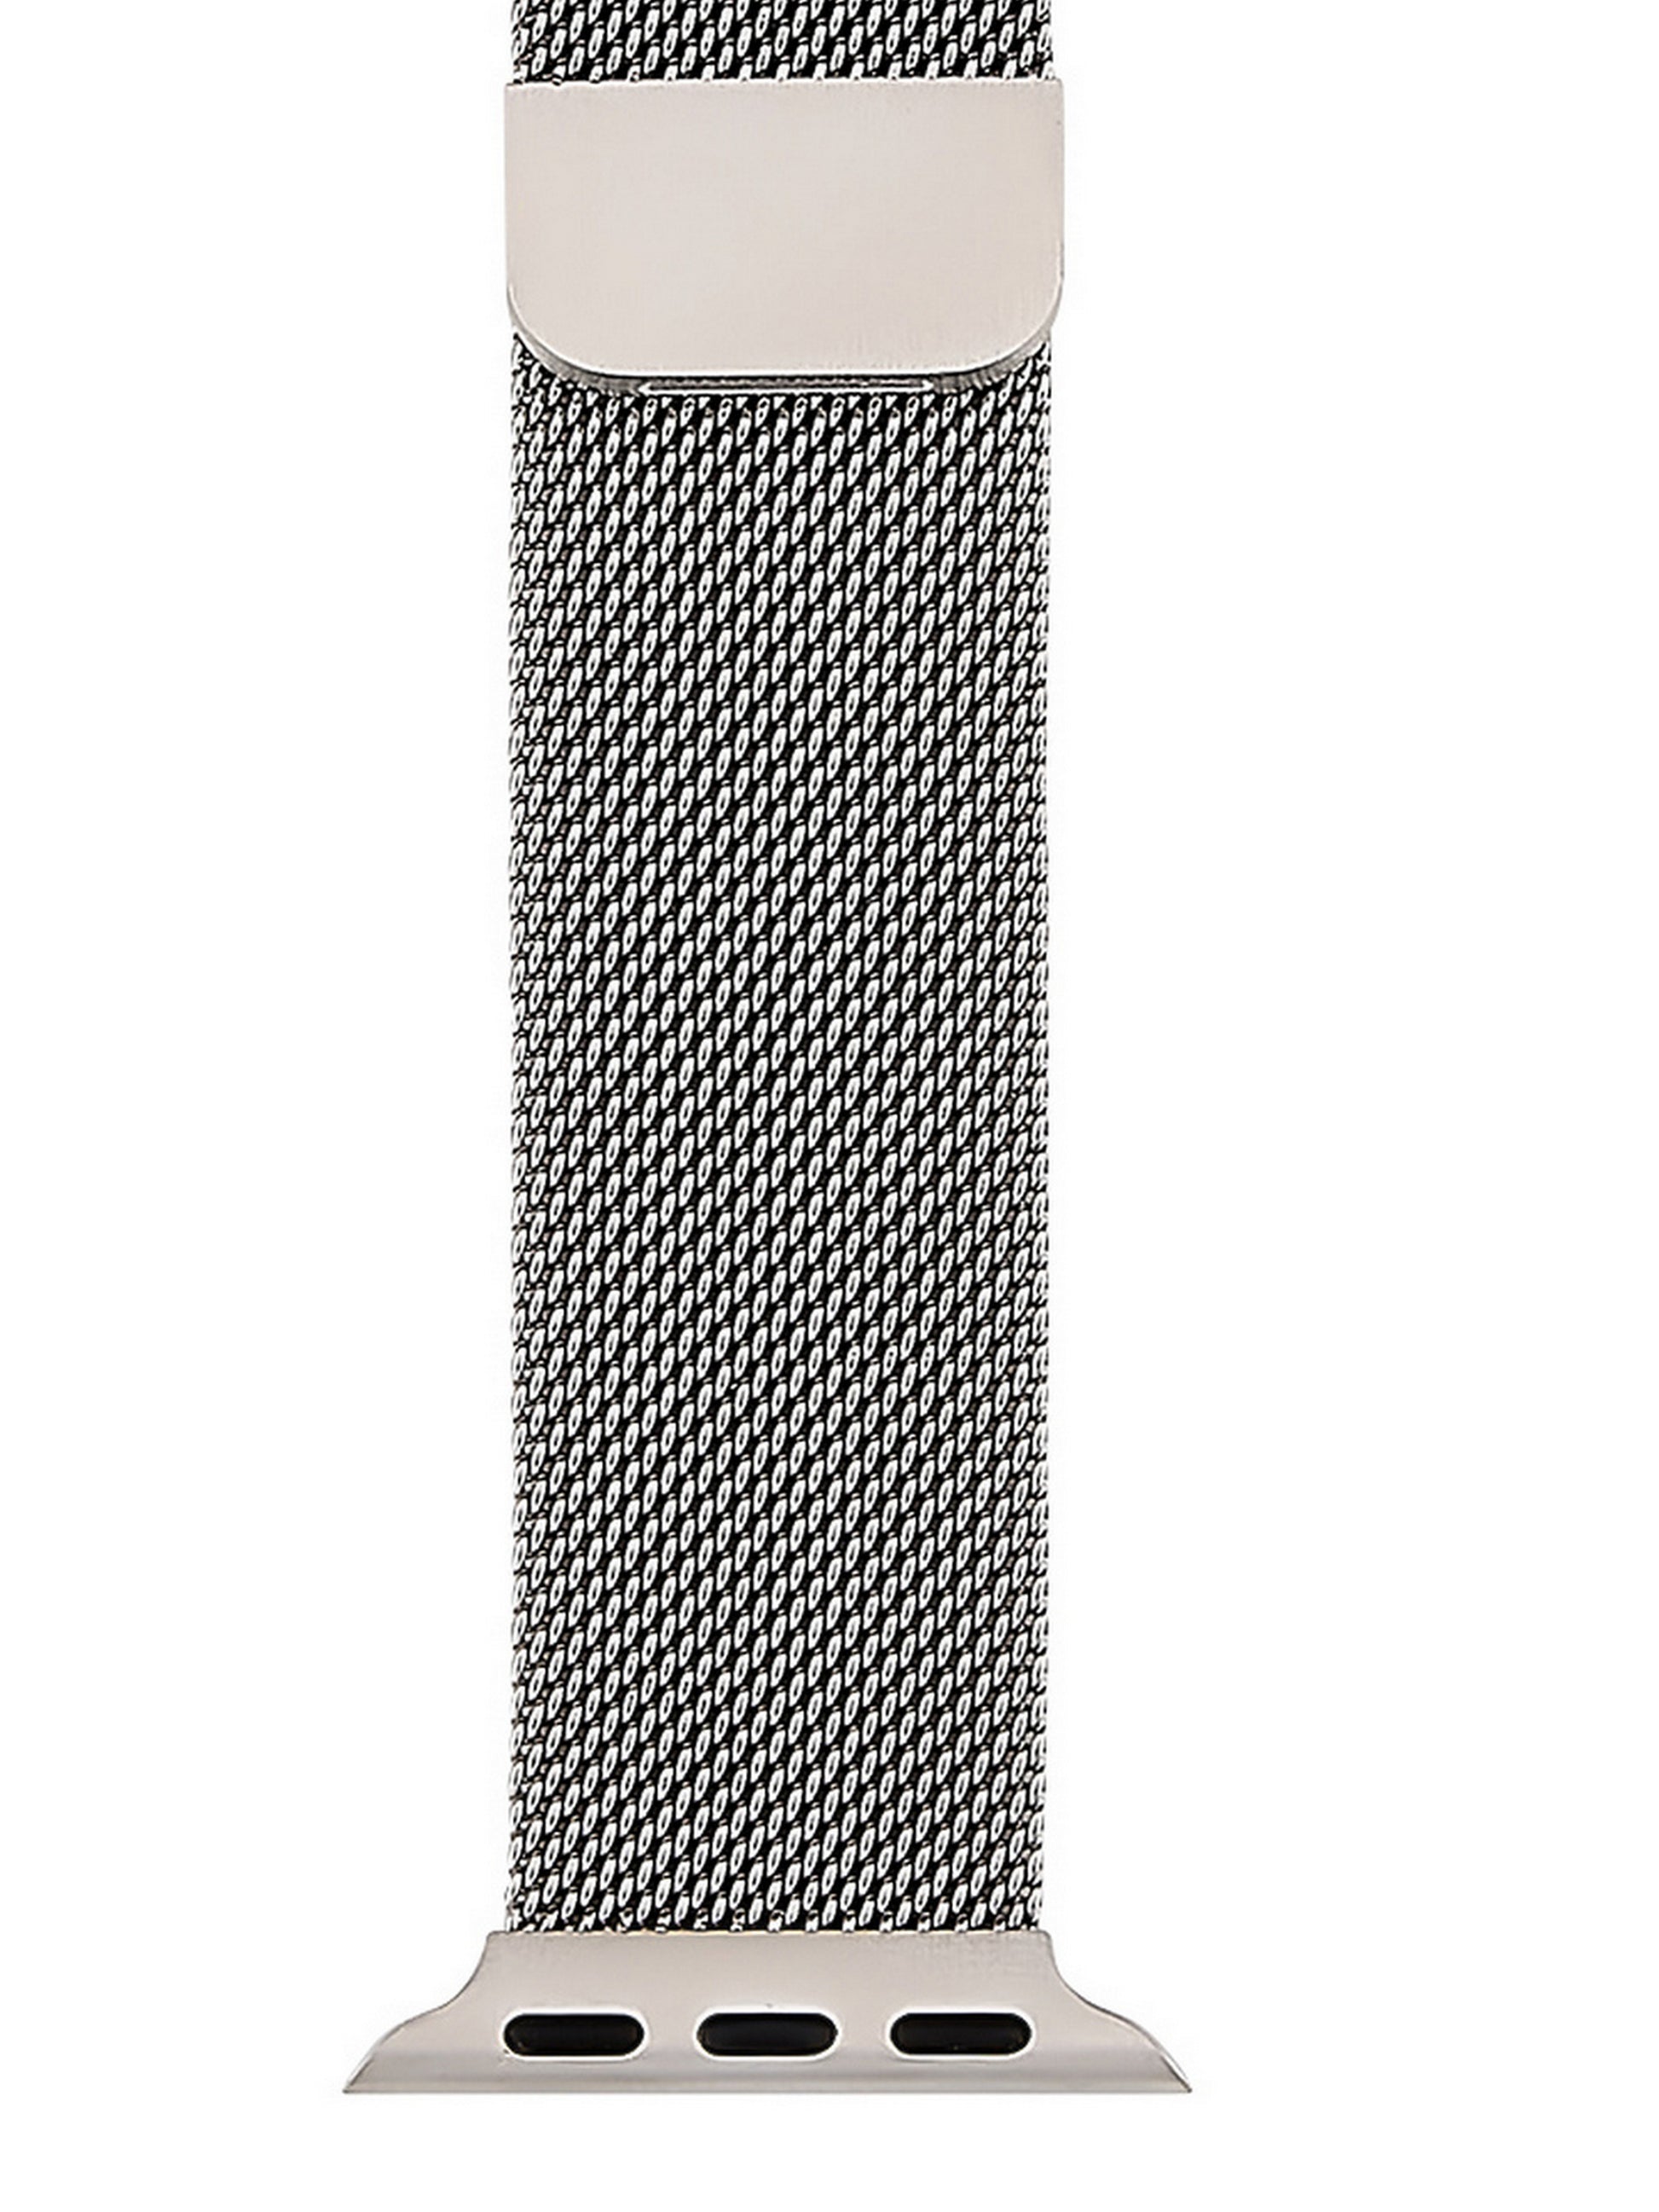 Rae Dunn Watch Bands Set of 3, compatible with Apple Watch 38mm 40mm Silicone, Link, Mesh in Silver - Rae Dunn Wear - Watch